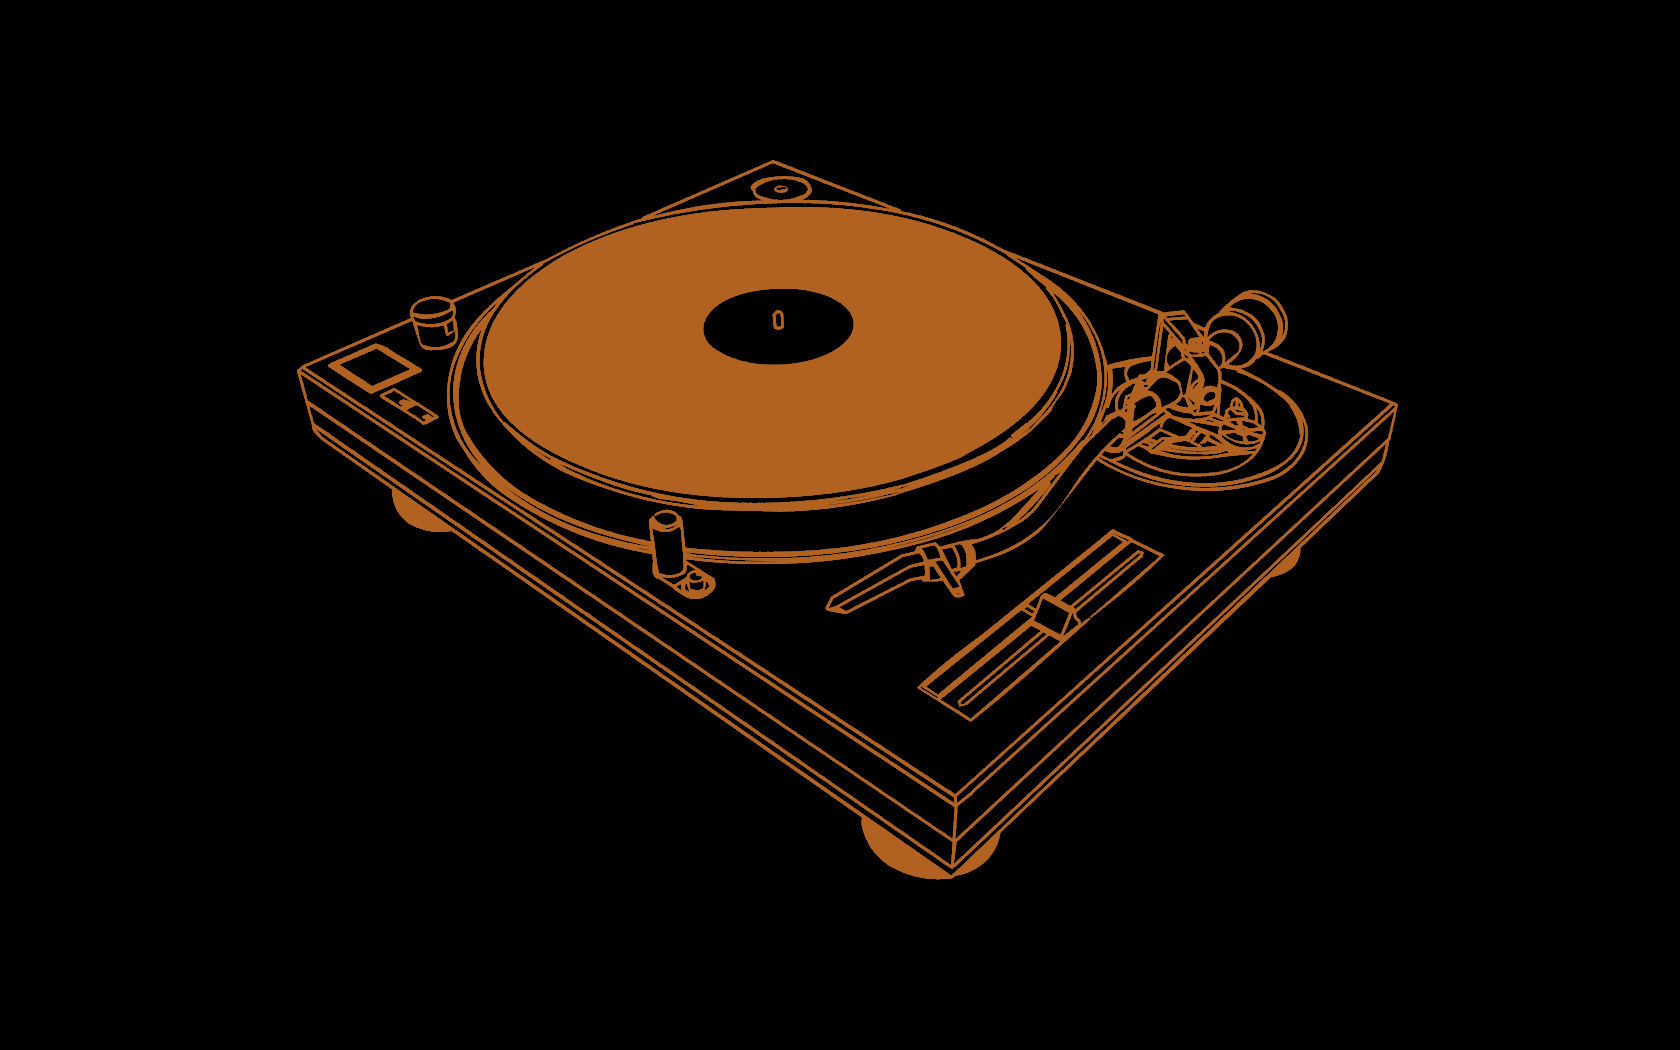 Turntable turntables wallpaper - (#173385) - High Quality and ...